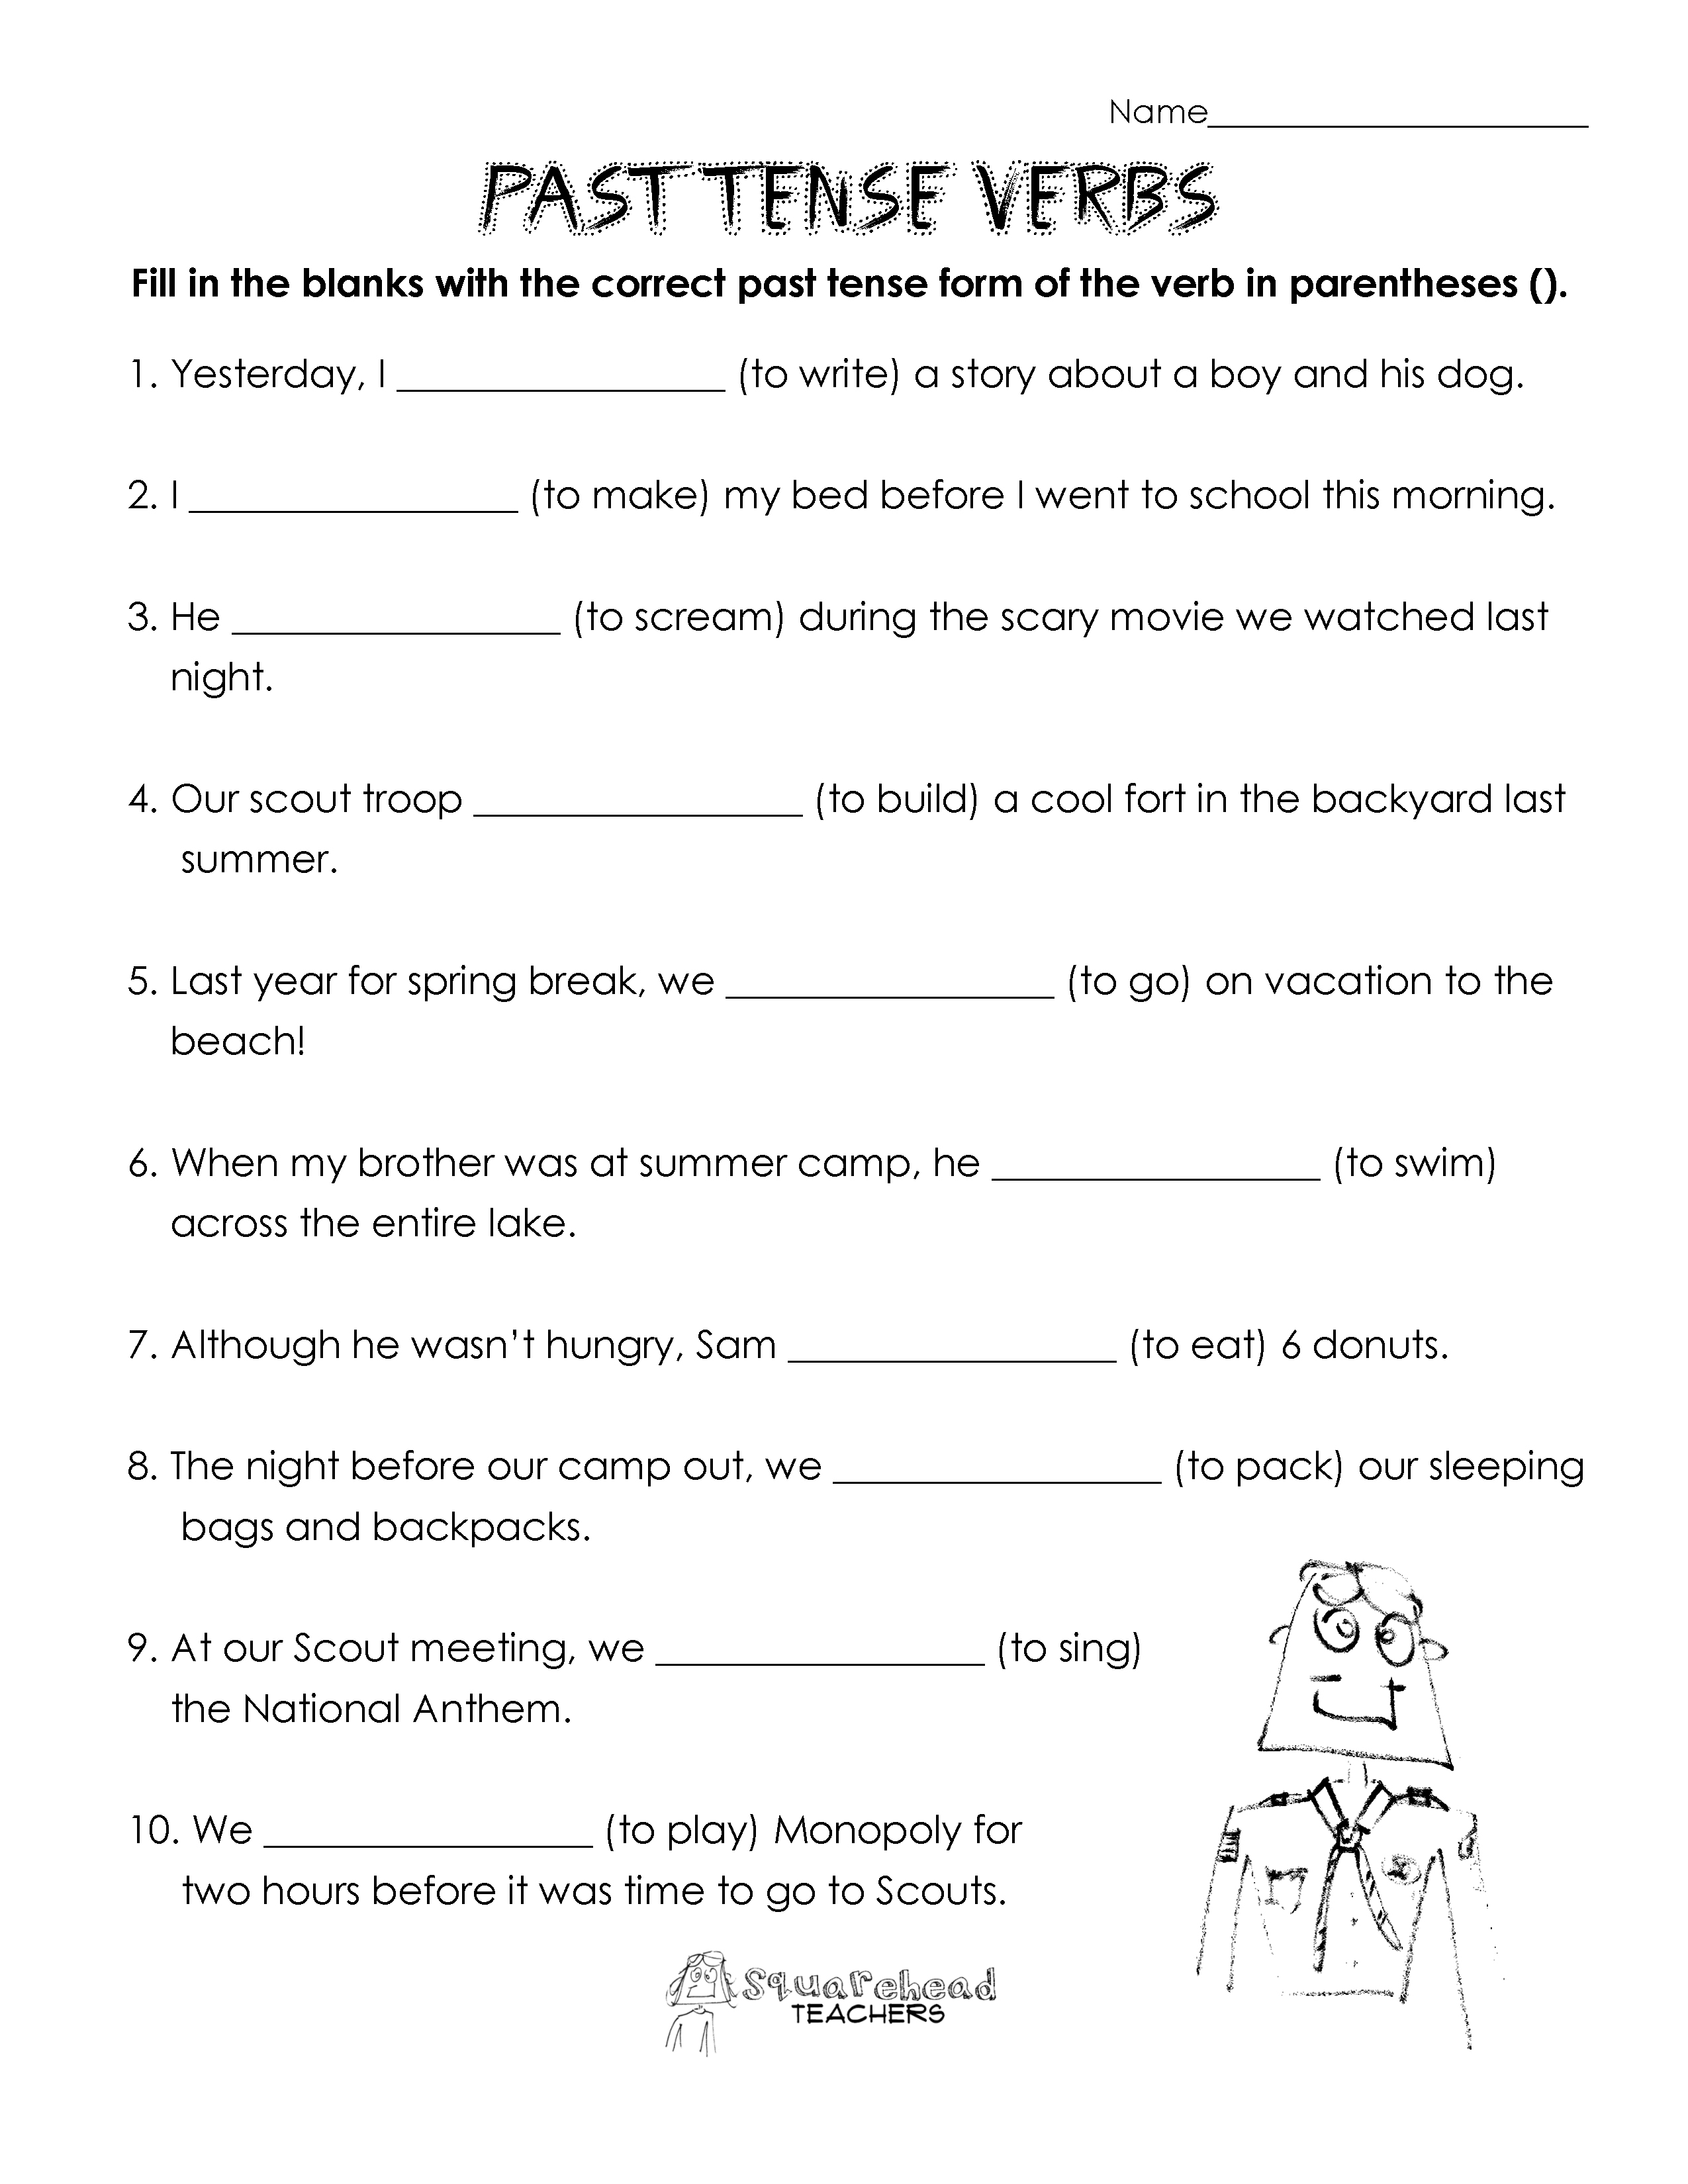 13-best-images-of-simple-present-worksheets-routines-worksheets-simple-present-tense